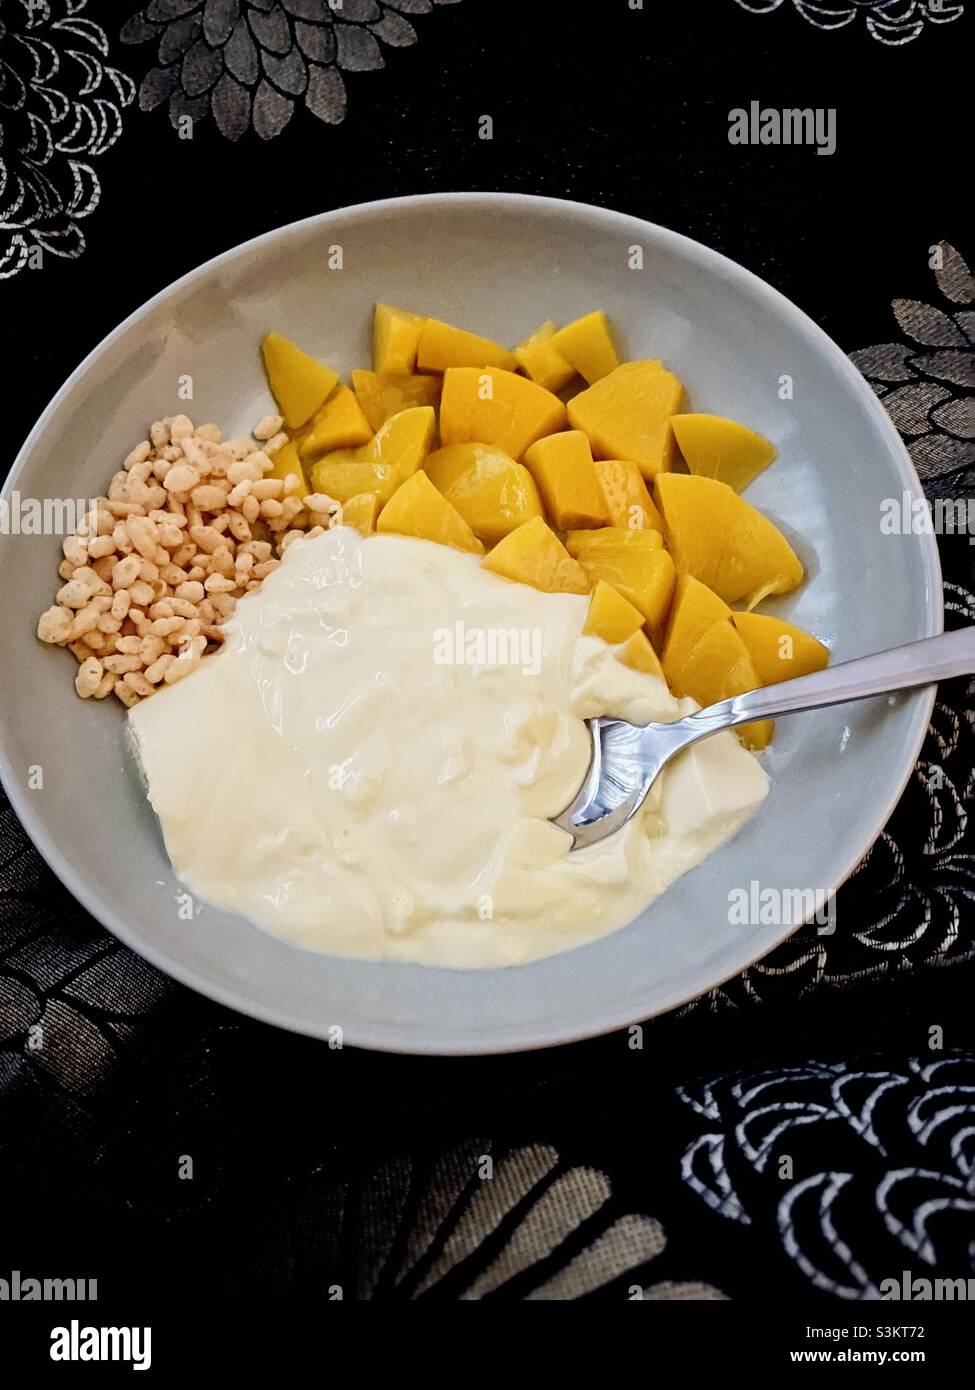 Breakfast in bed - yoghurt, chopped fruit and cereal in a bowl with a spoon on a black pattered duvet cover Stock Photo